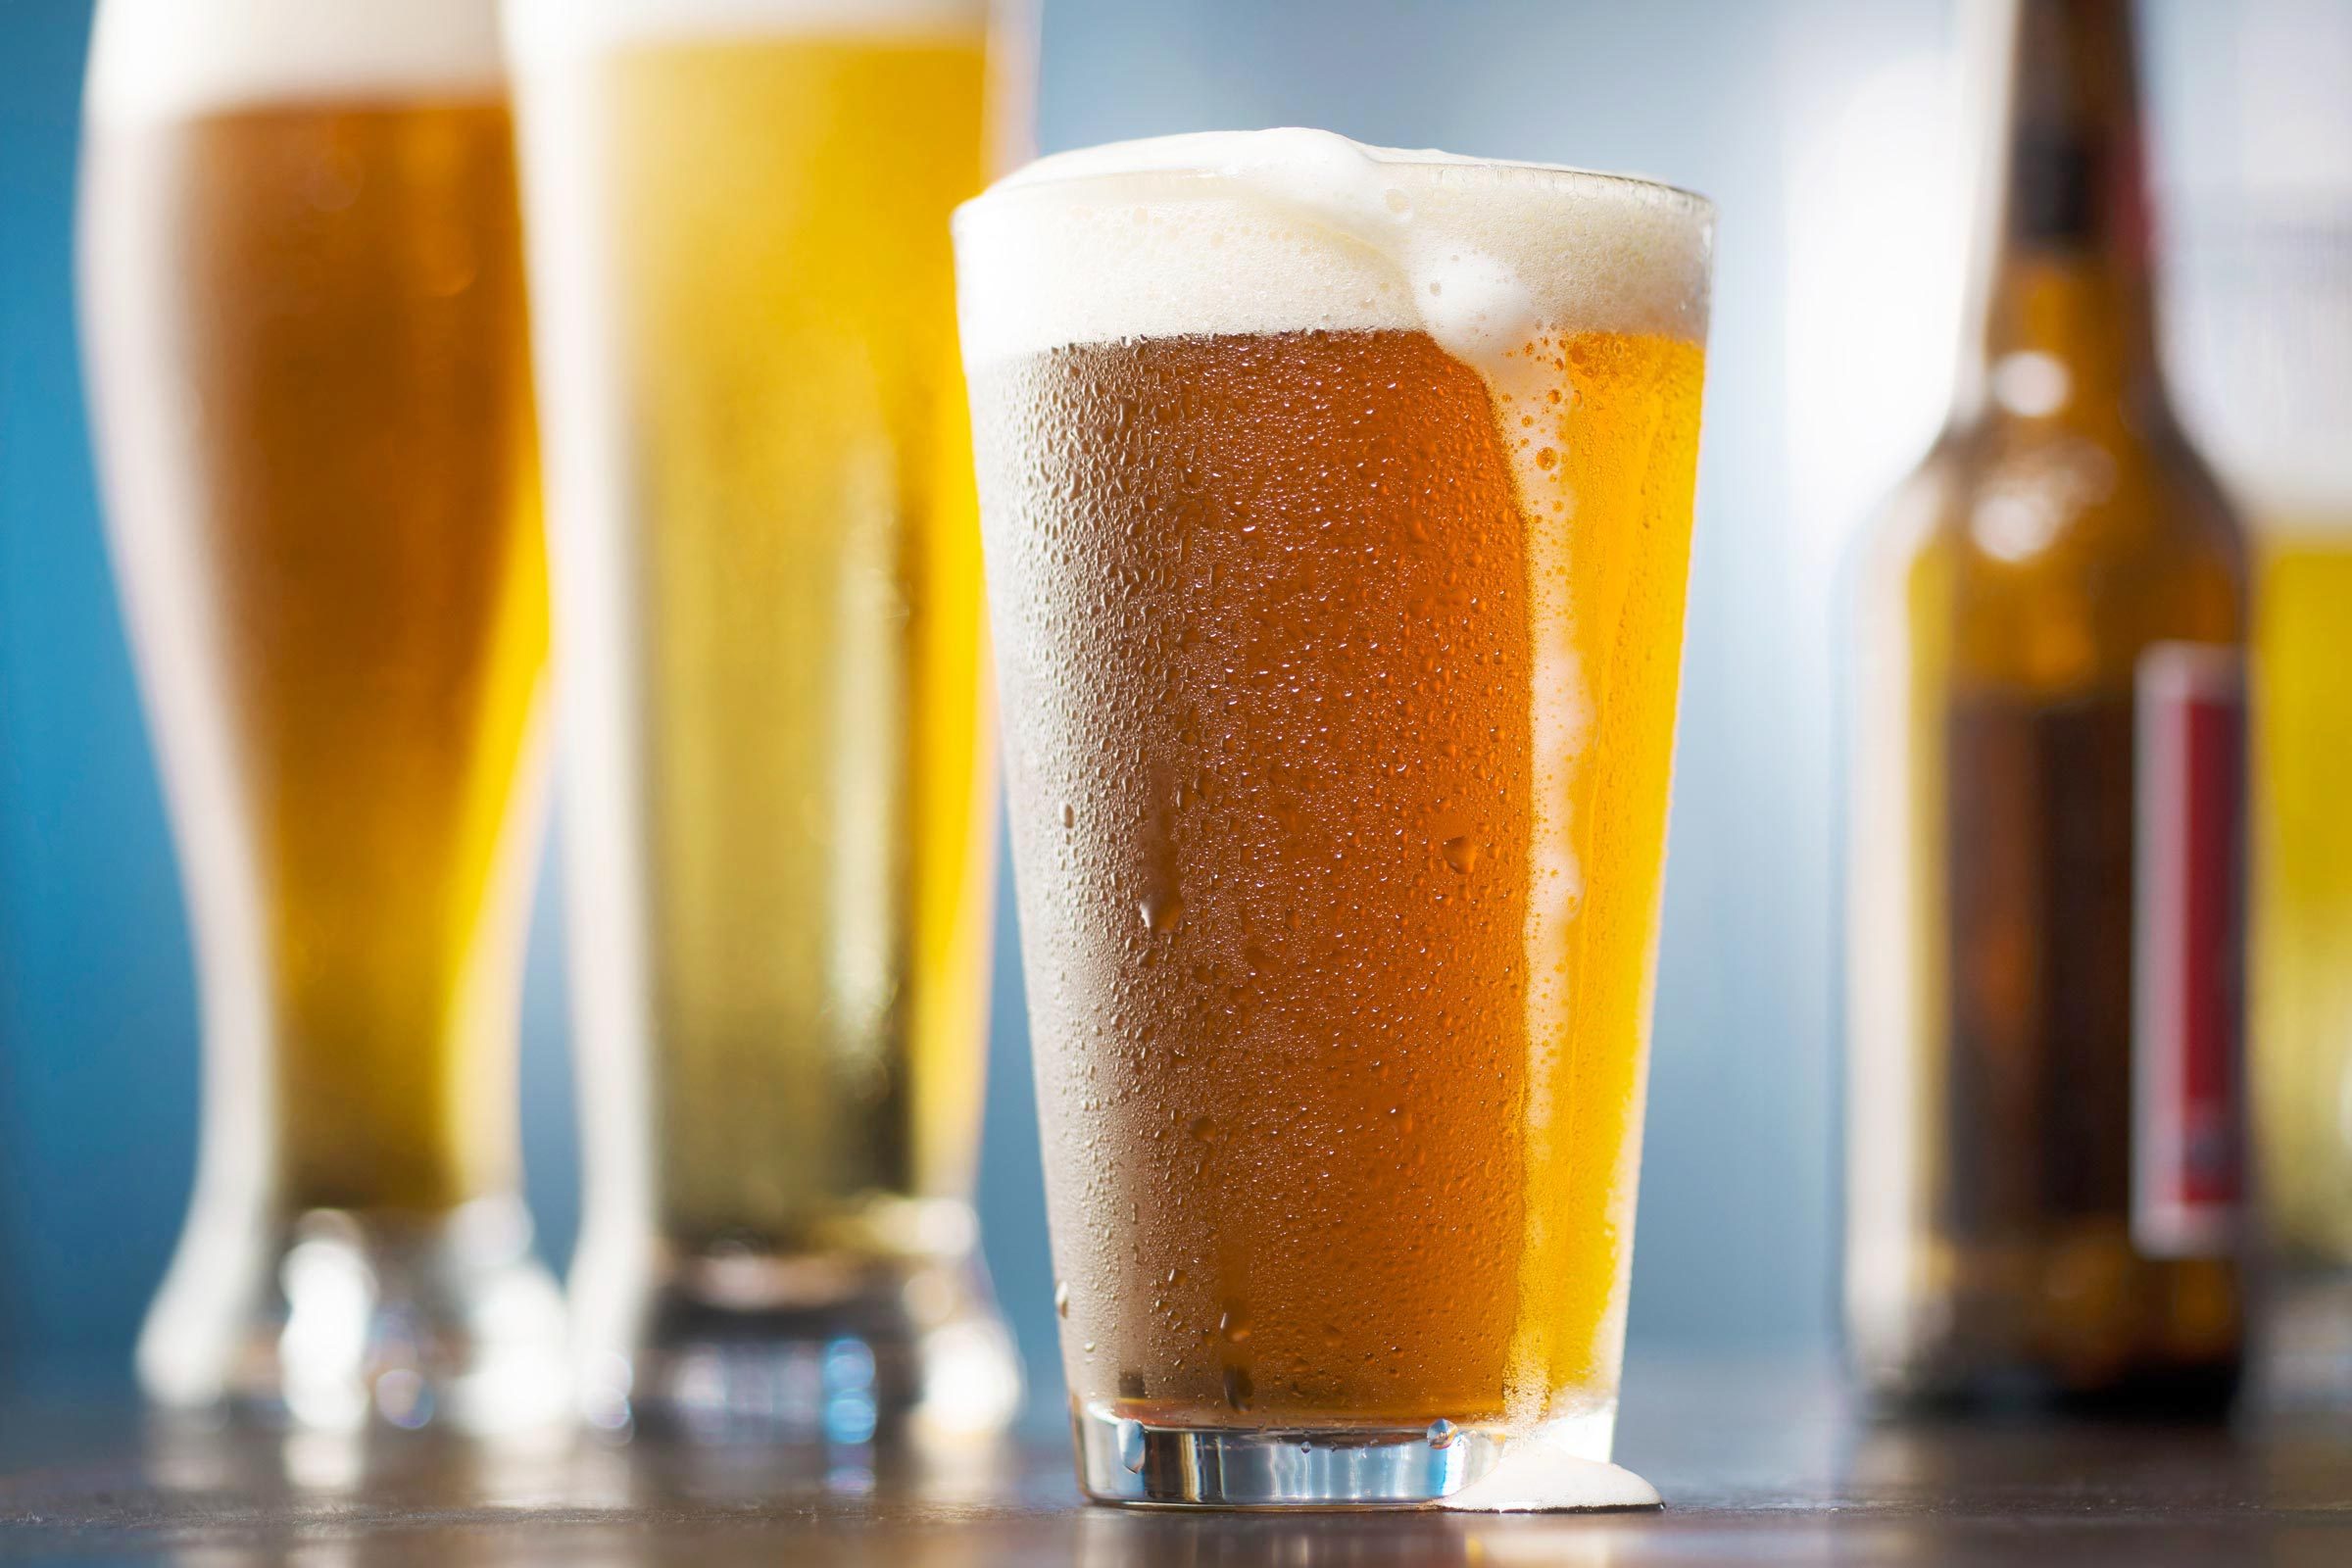 https://www.thehealthy.com/wp-content/uploads/2023/03/TH-beer-GettyImages-547626079-JVedit2.jpg?fit=700%2C1024